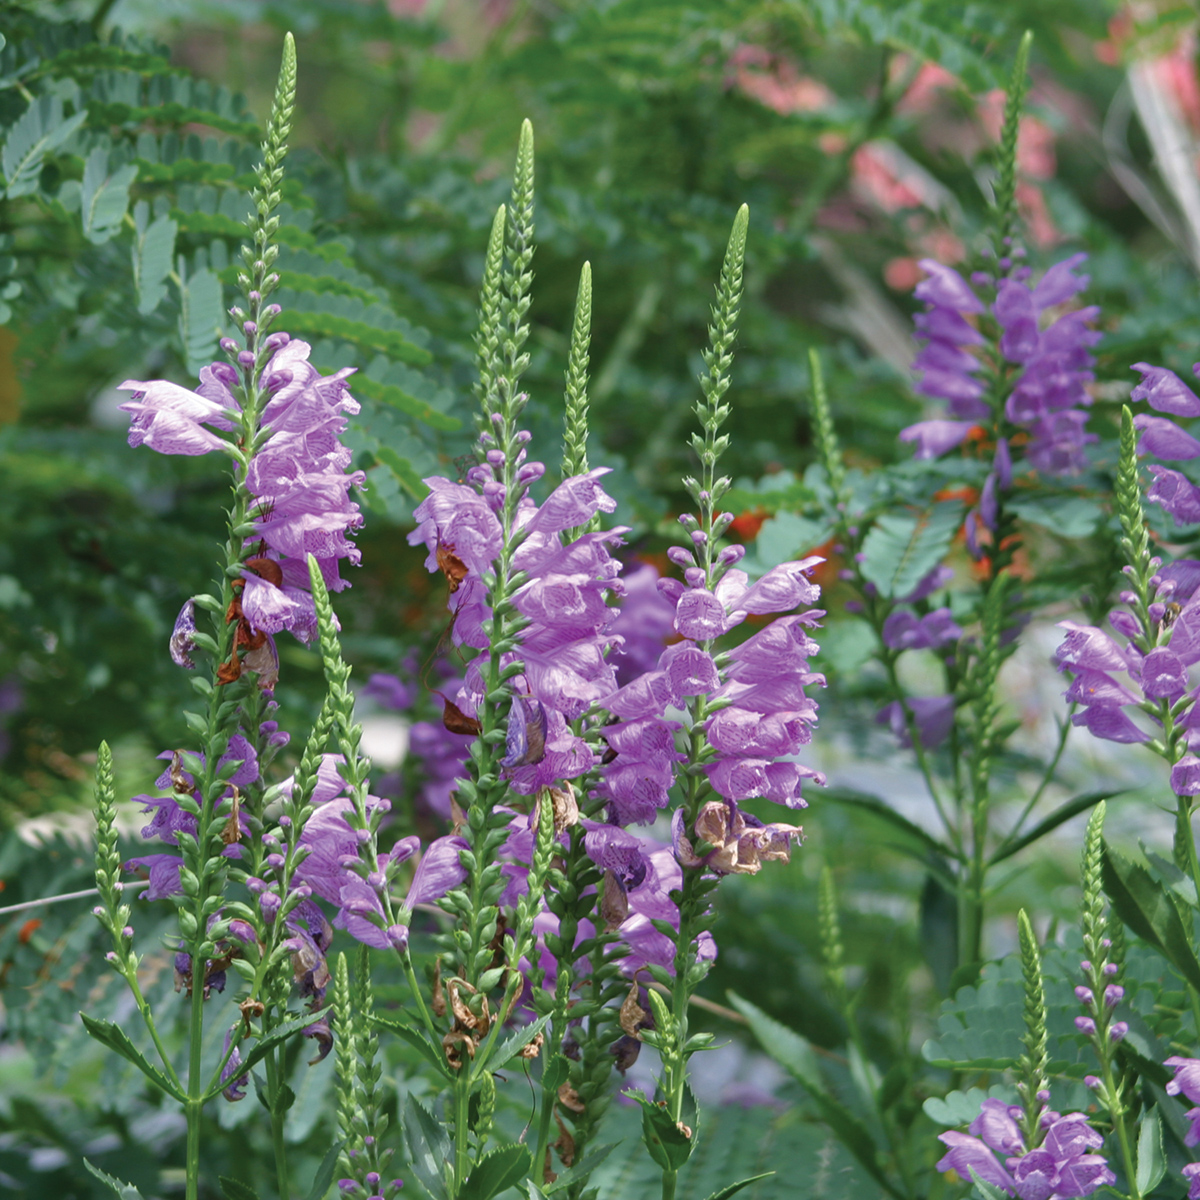 Obedient Plant, Fall Phystostegia virginiana